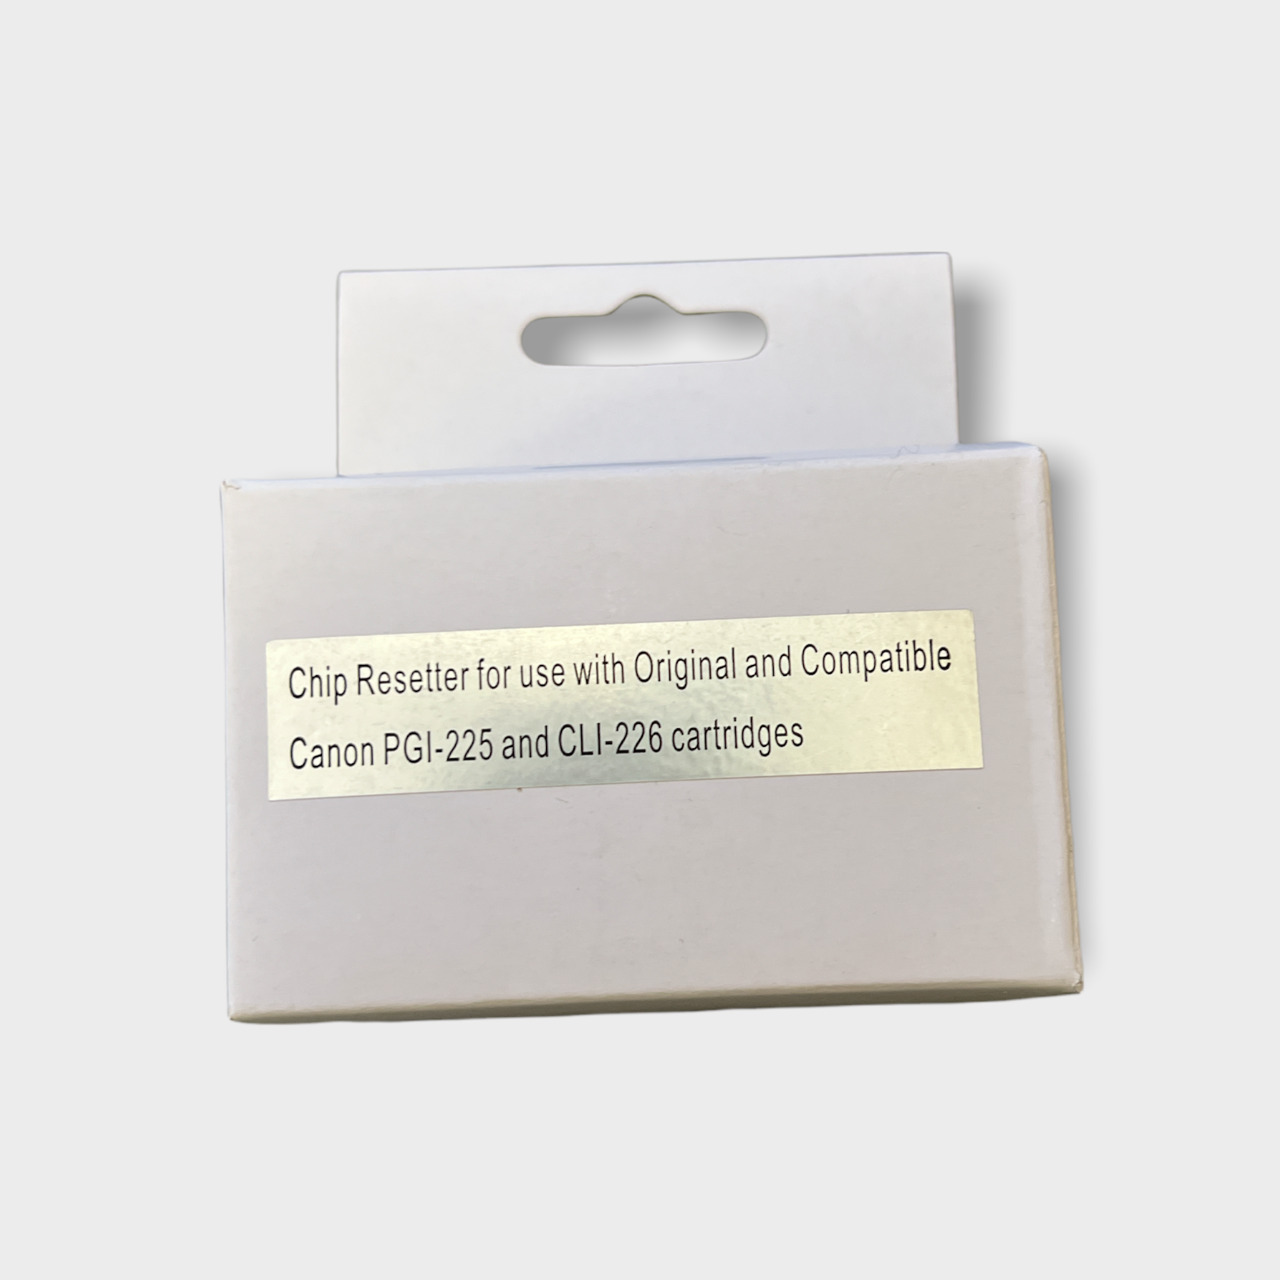 Chip Resetter for use with CANON CLI-226 PGI-225 cartridges Canon PIXMA iP4820